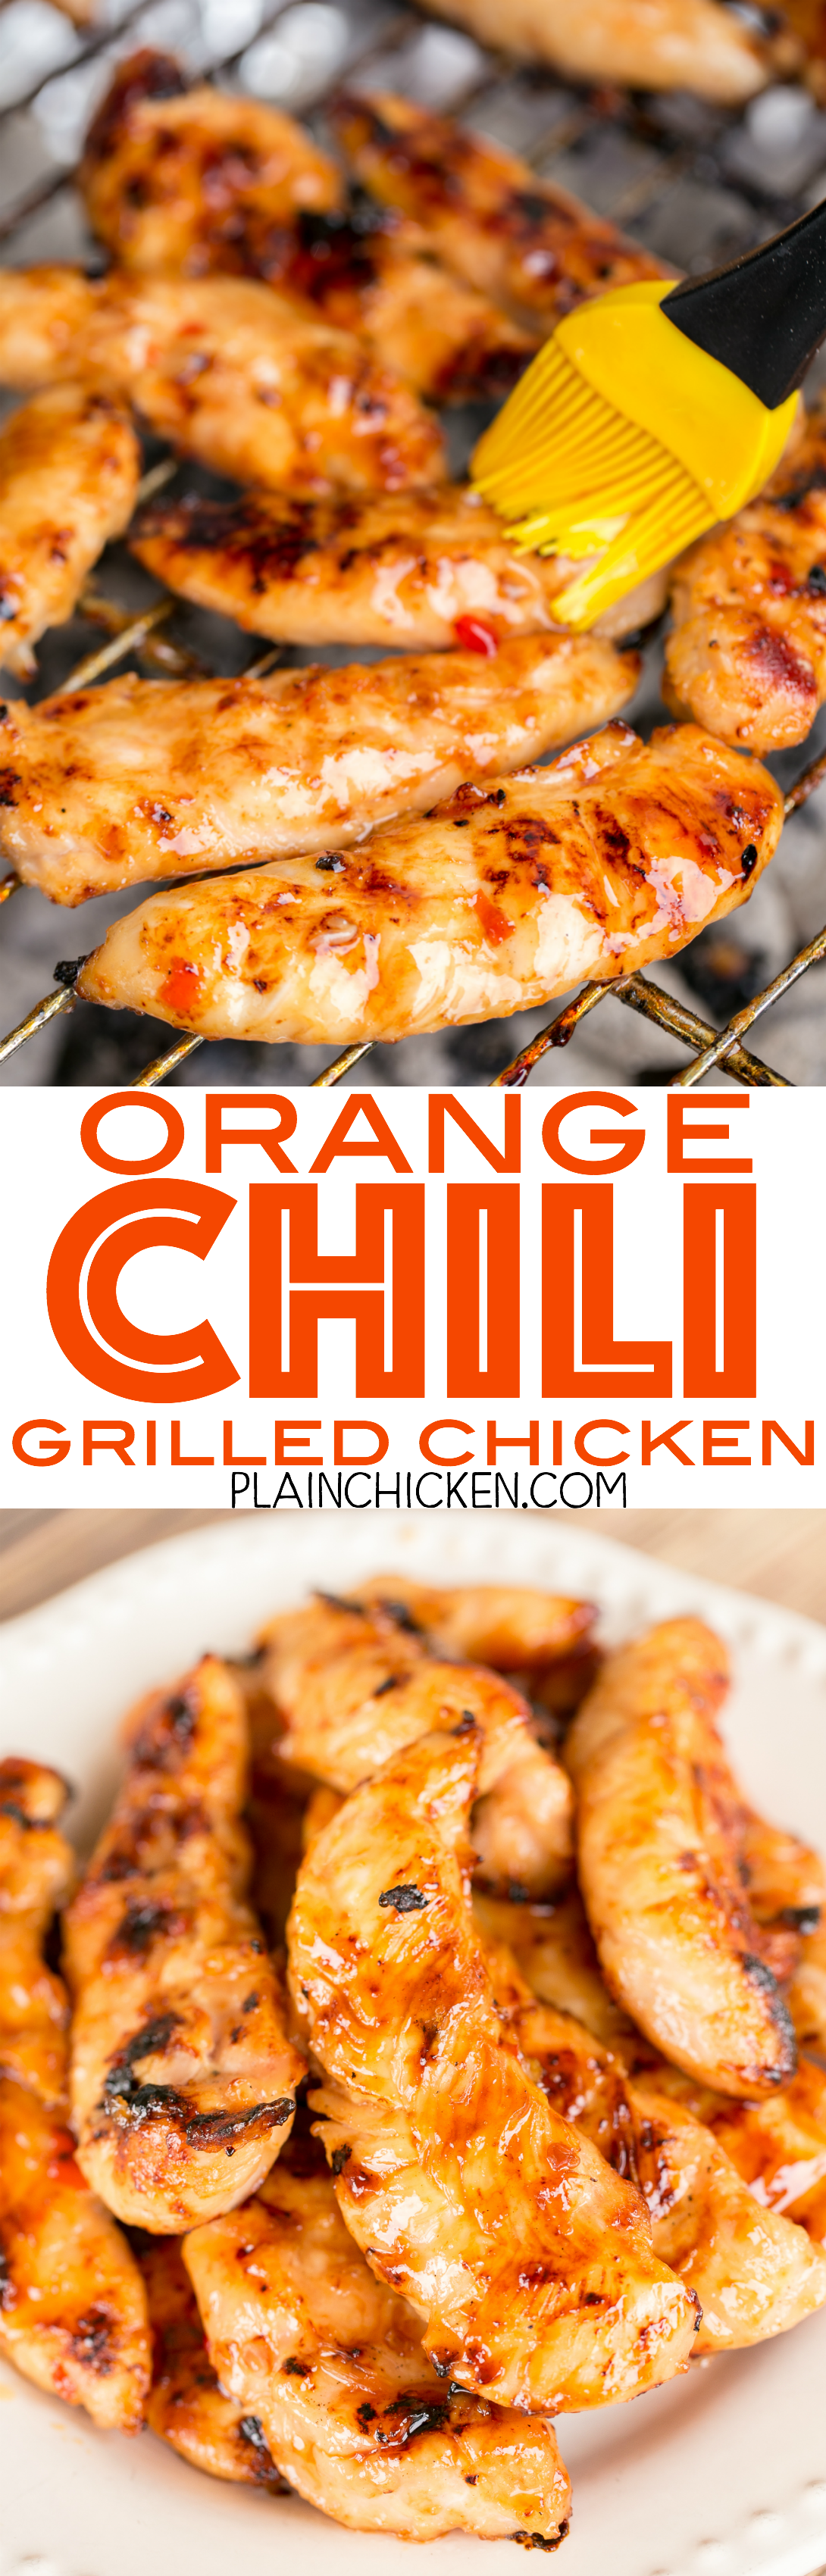 Orange Chili Grilled Chicken – seriously delicious! Only 4 ingredients! Chicken, sweet chili sauce, honey and orange juice. Grill